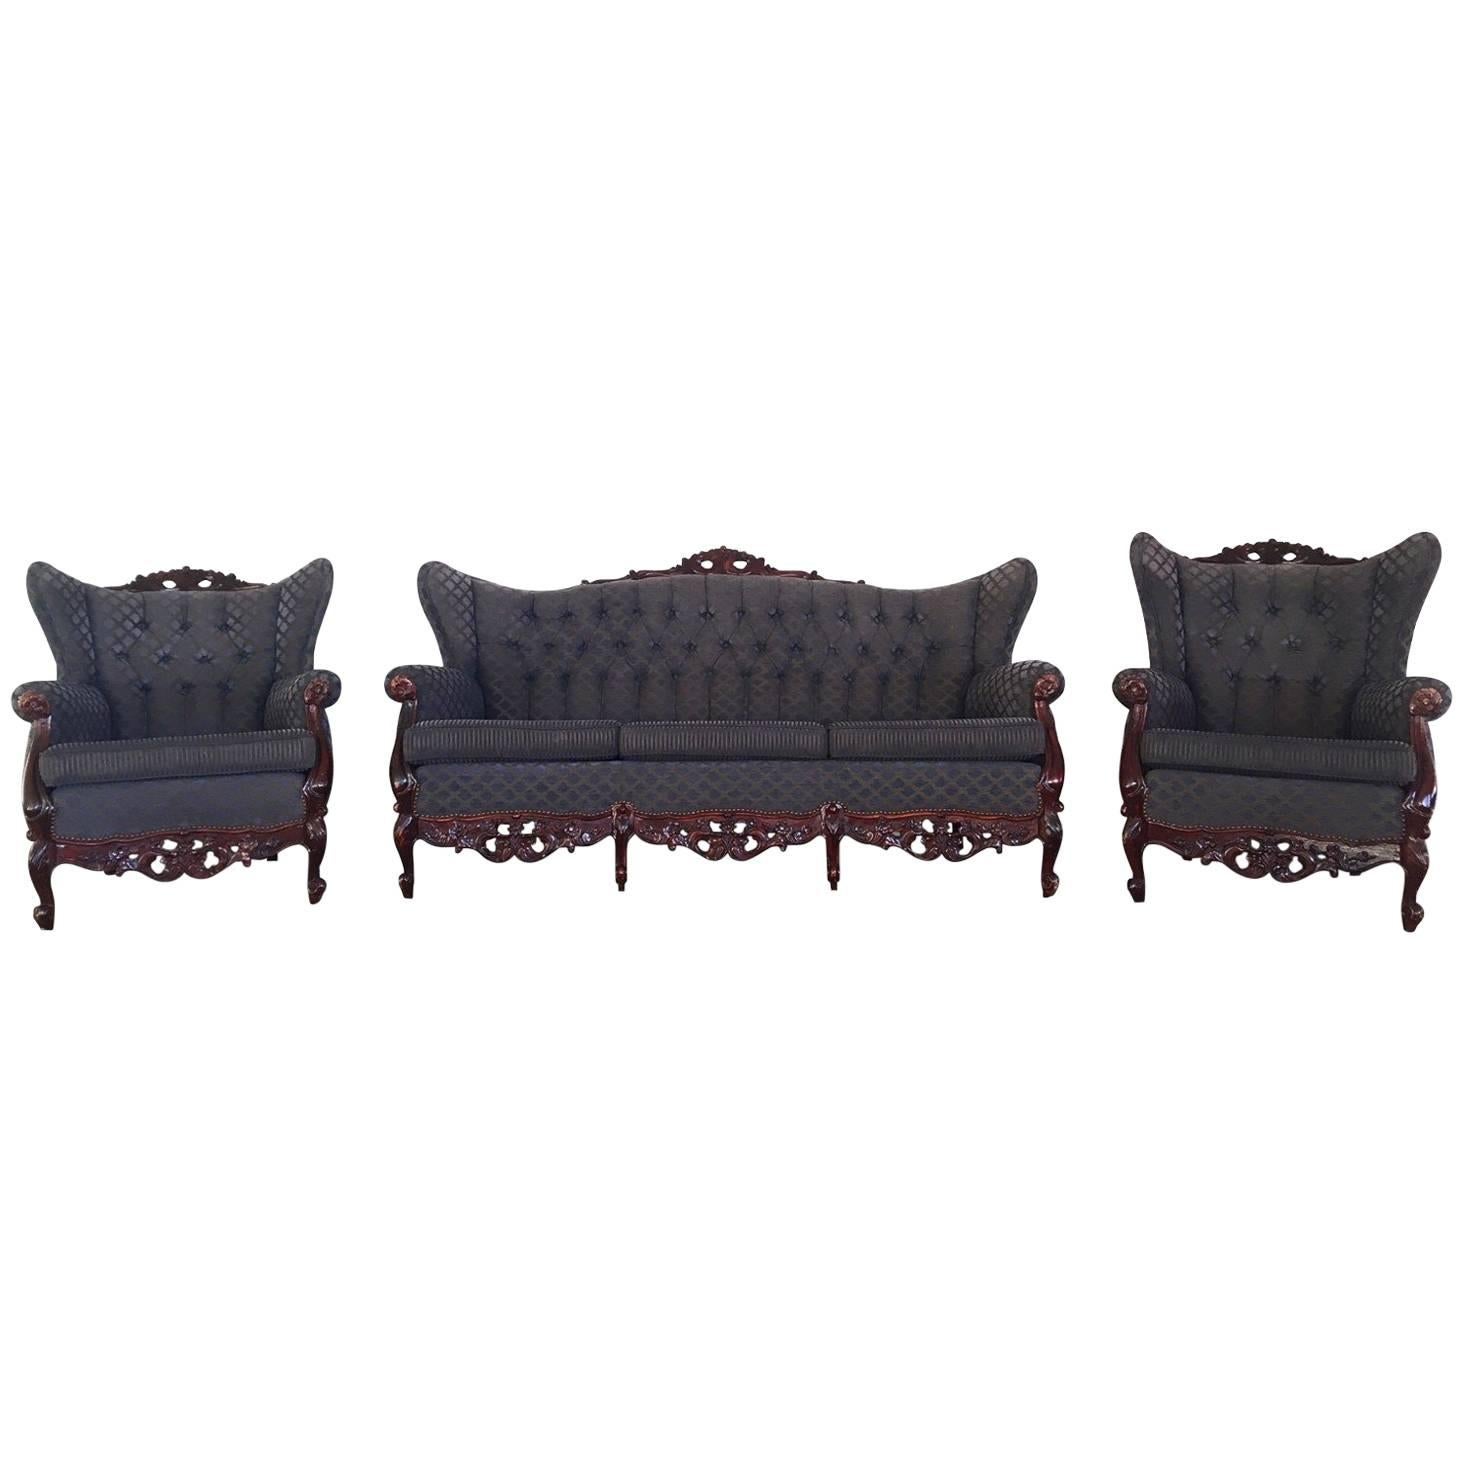 20th Century French Sofa Set, Rococo Baroque Style with Two Wingback Chairs For Sale